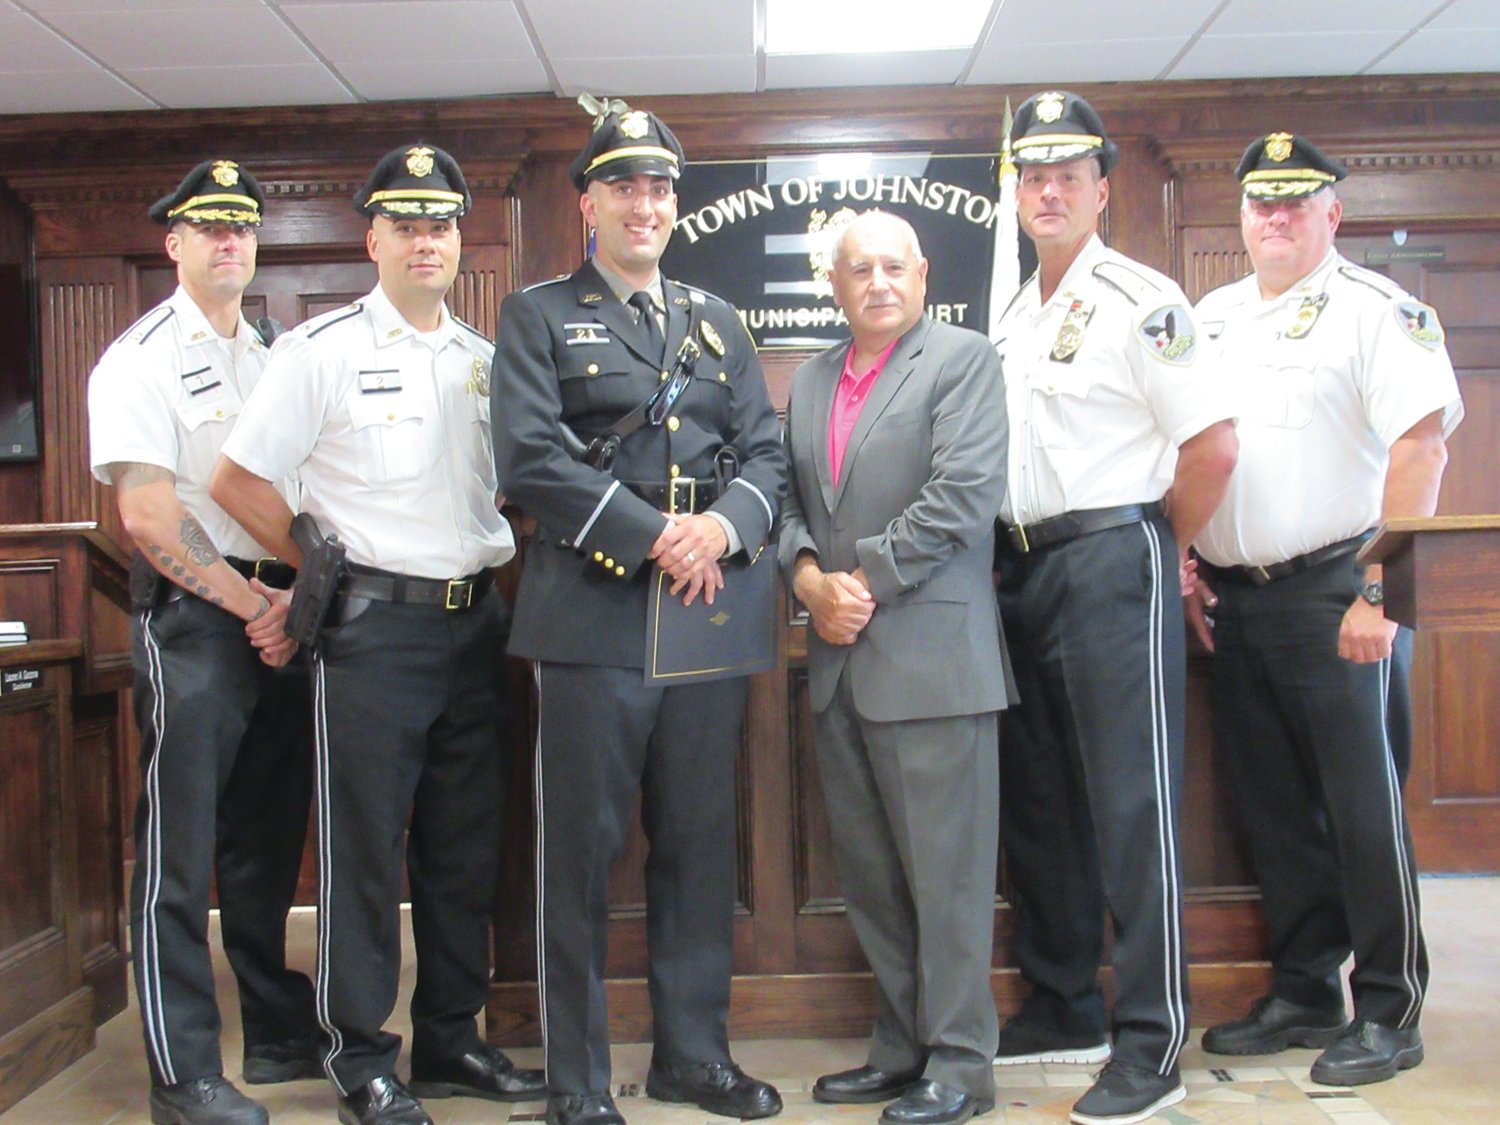 SARGE’S SUPPORTERS: Newly promoted Sgt. Andrew Broccoli is joined by Mayor Joseph Polisena and Chief Joseph P. Razza and other officers who will offer their fullest support as he begins another chapter in his law enforcement career.